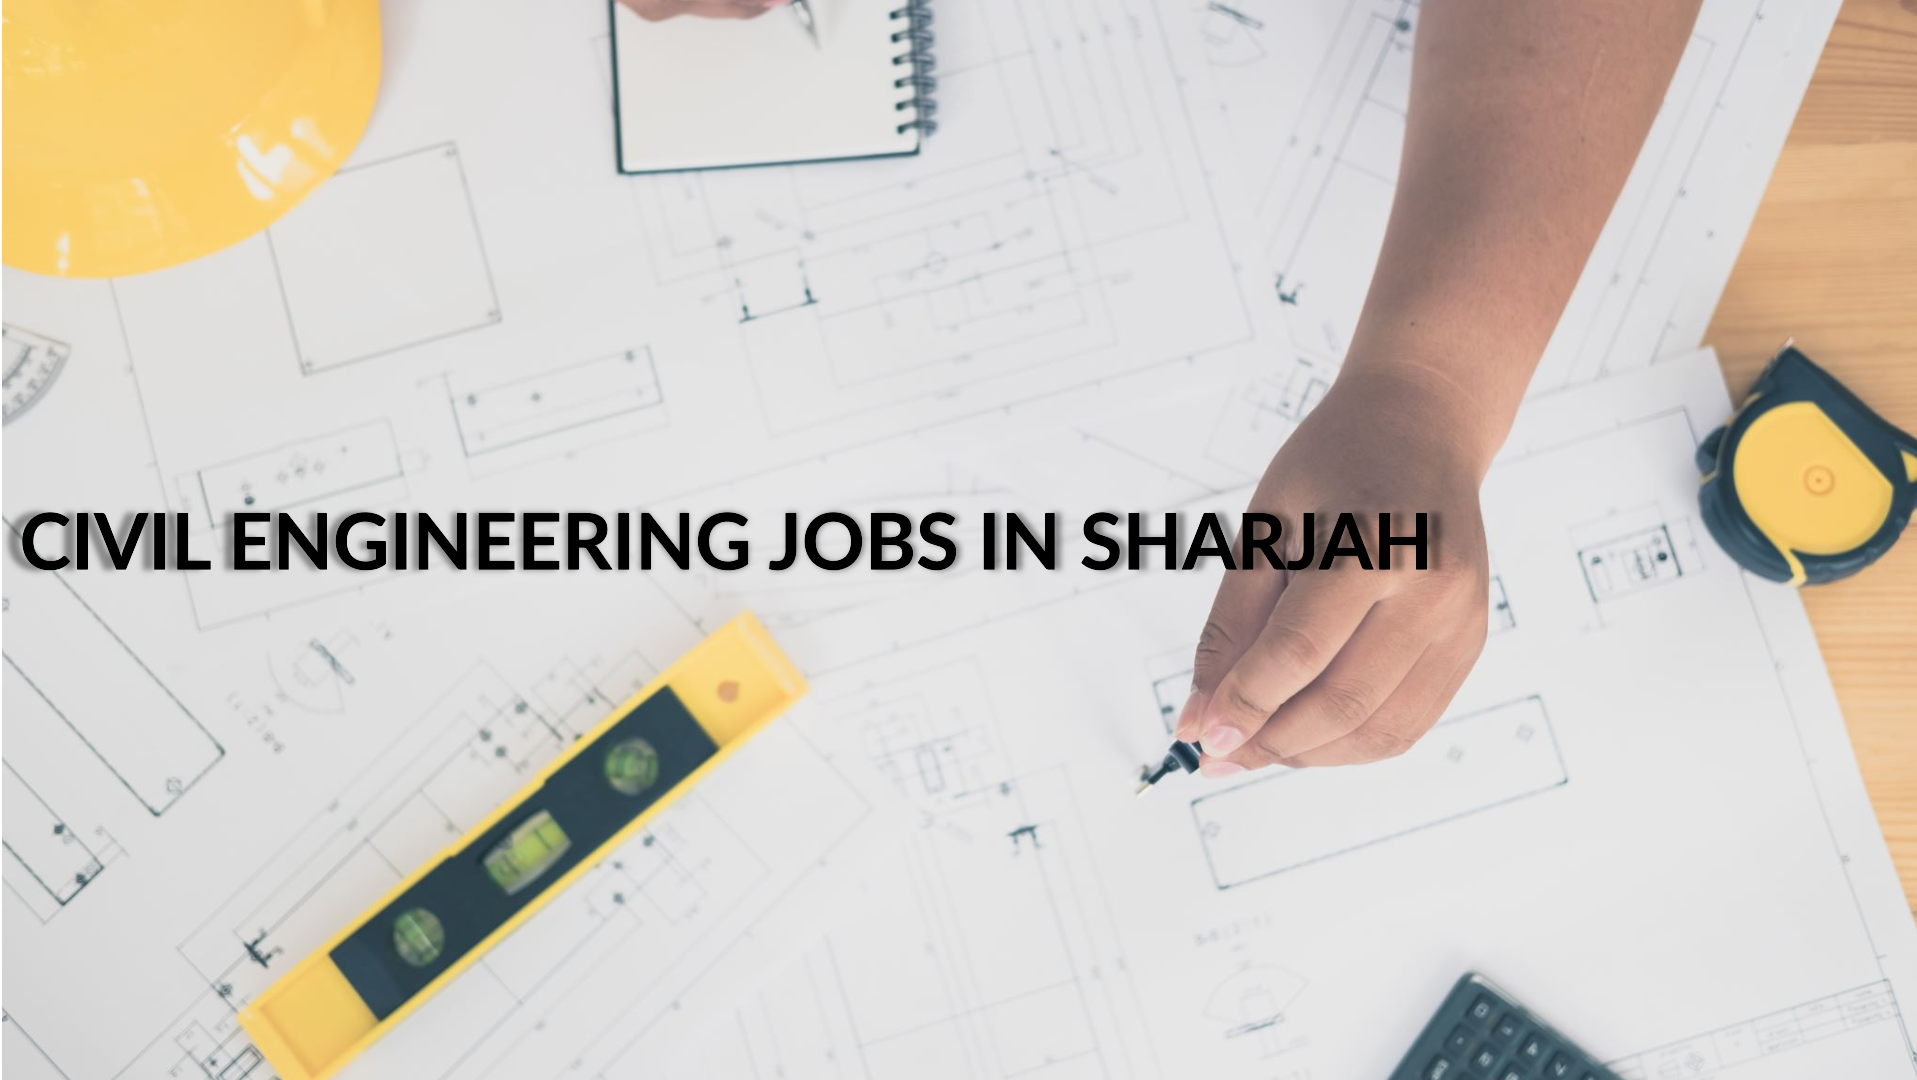 Civil Engineer jobs in Sharjah for Male and Female